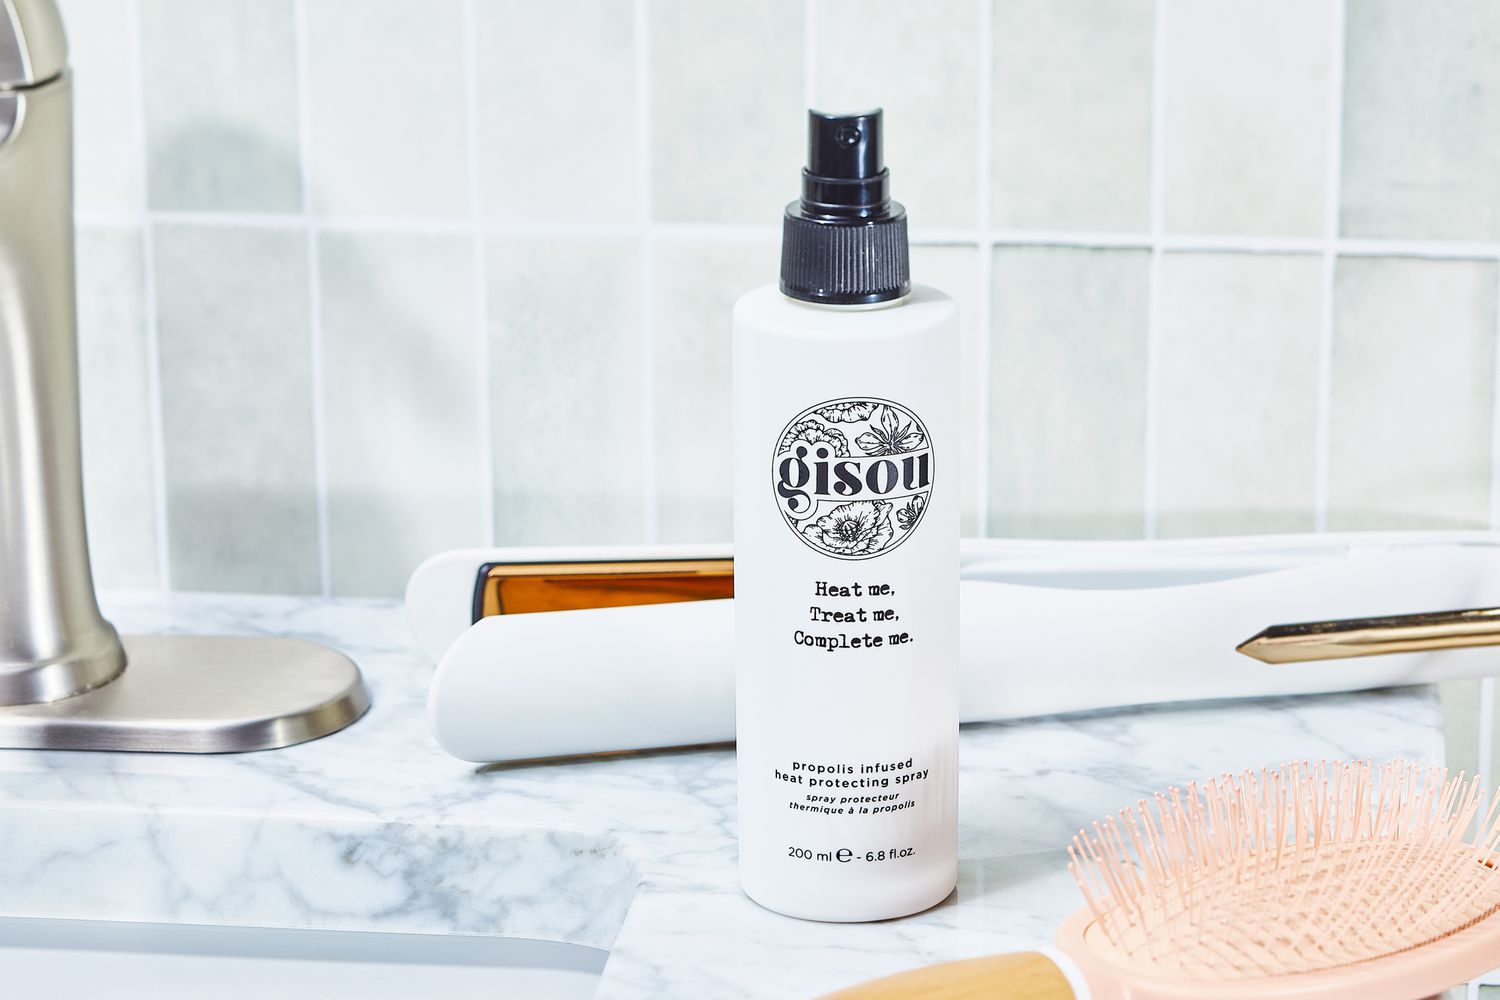 Gisou Heat Protecting Spray sits on bathroom counter next to hair styling tools